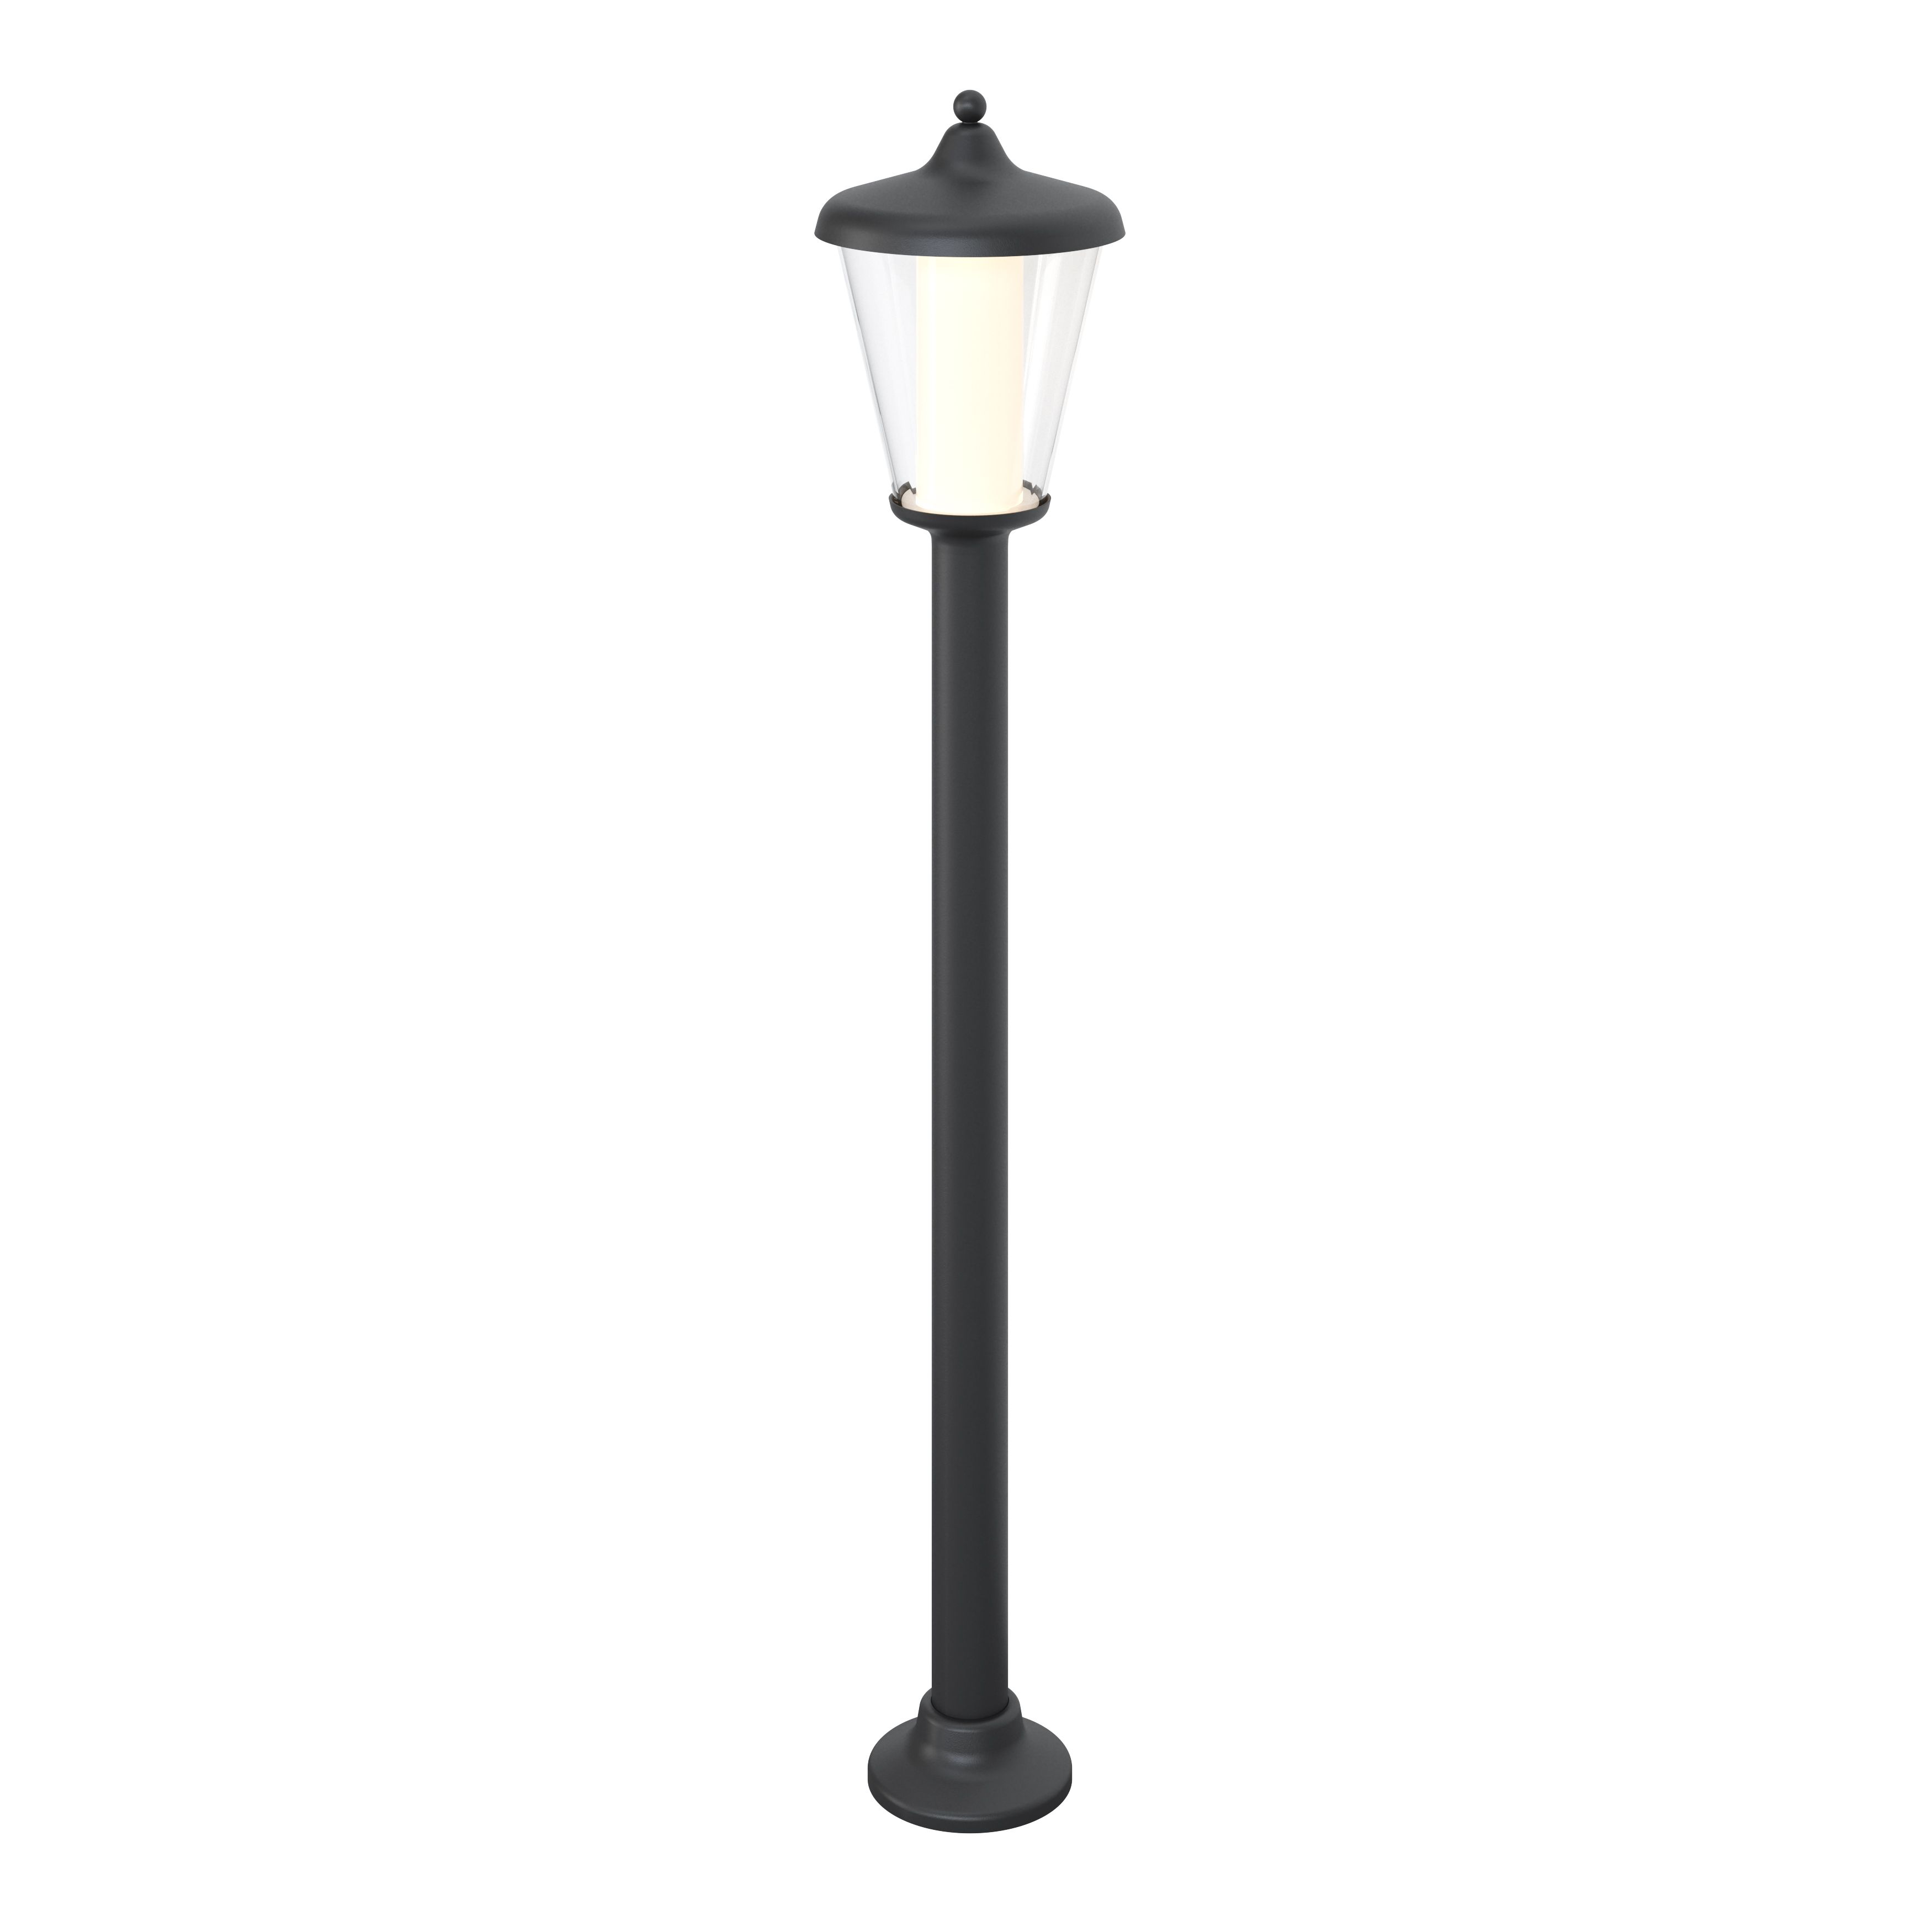 GoodHome Lantern Dark grey Mains-powered 1 lamp Integrated LED Outdoor Post light (H)1100mm